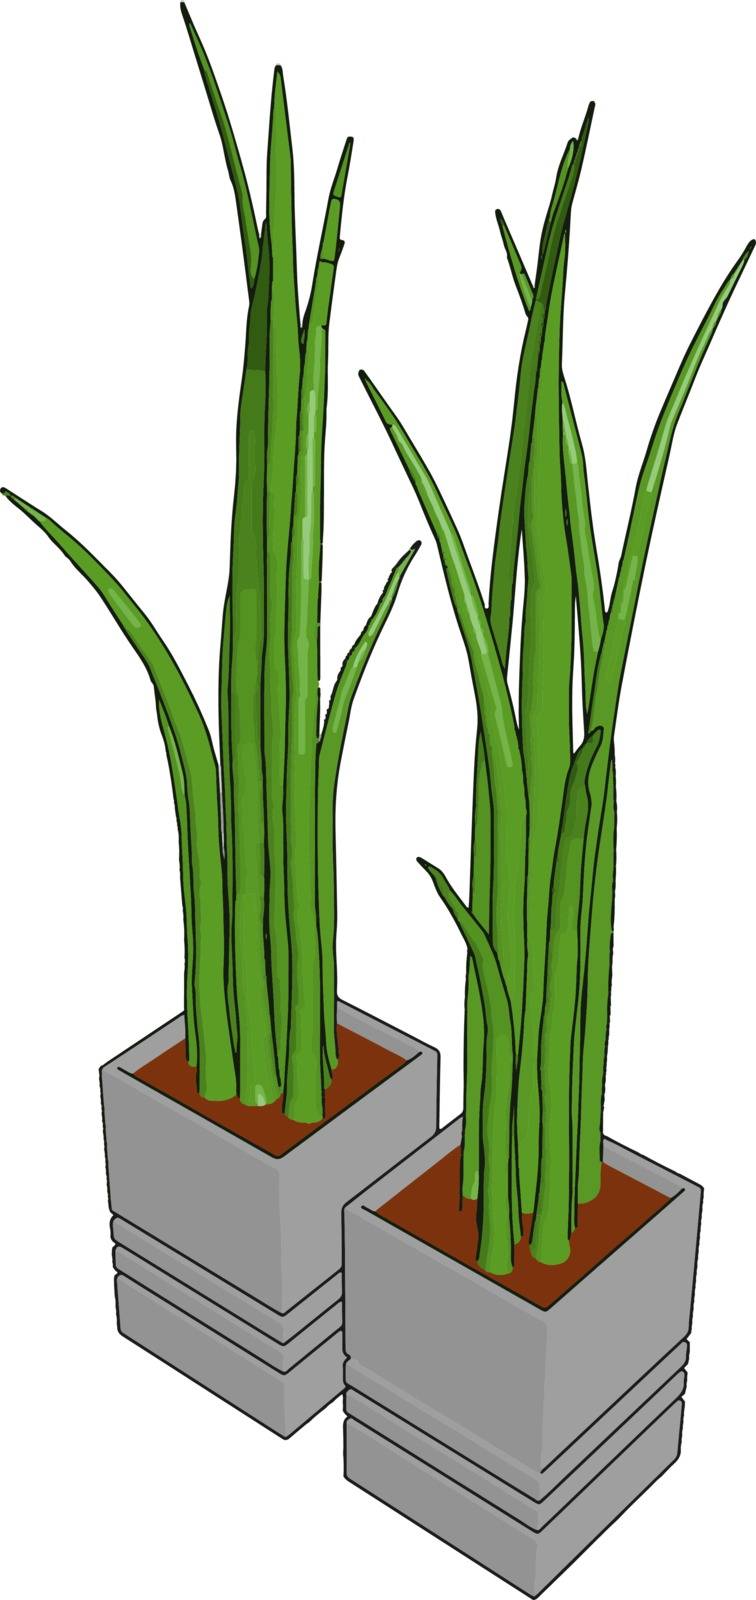 Grass in a pot, illustration, vector on white background. by Morphart